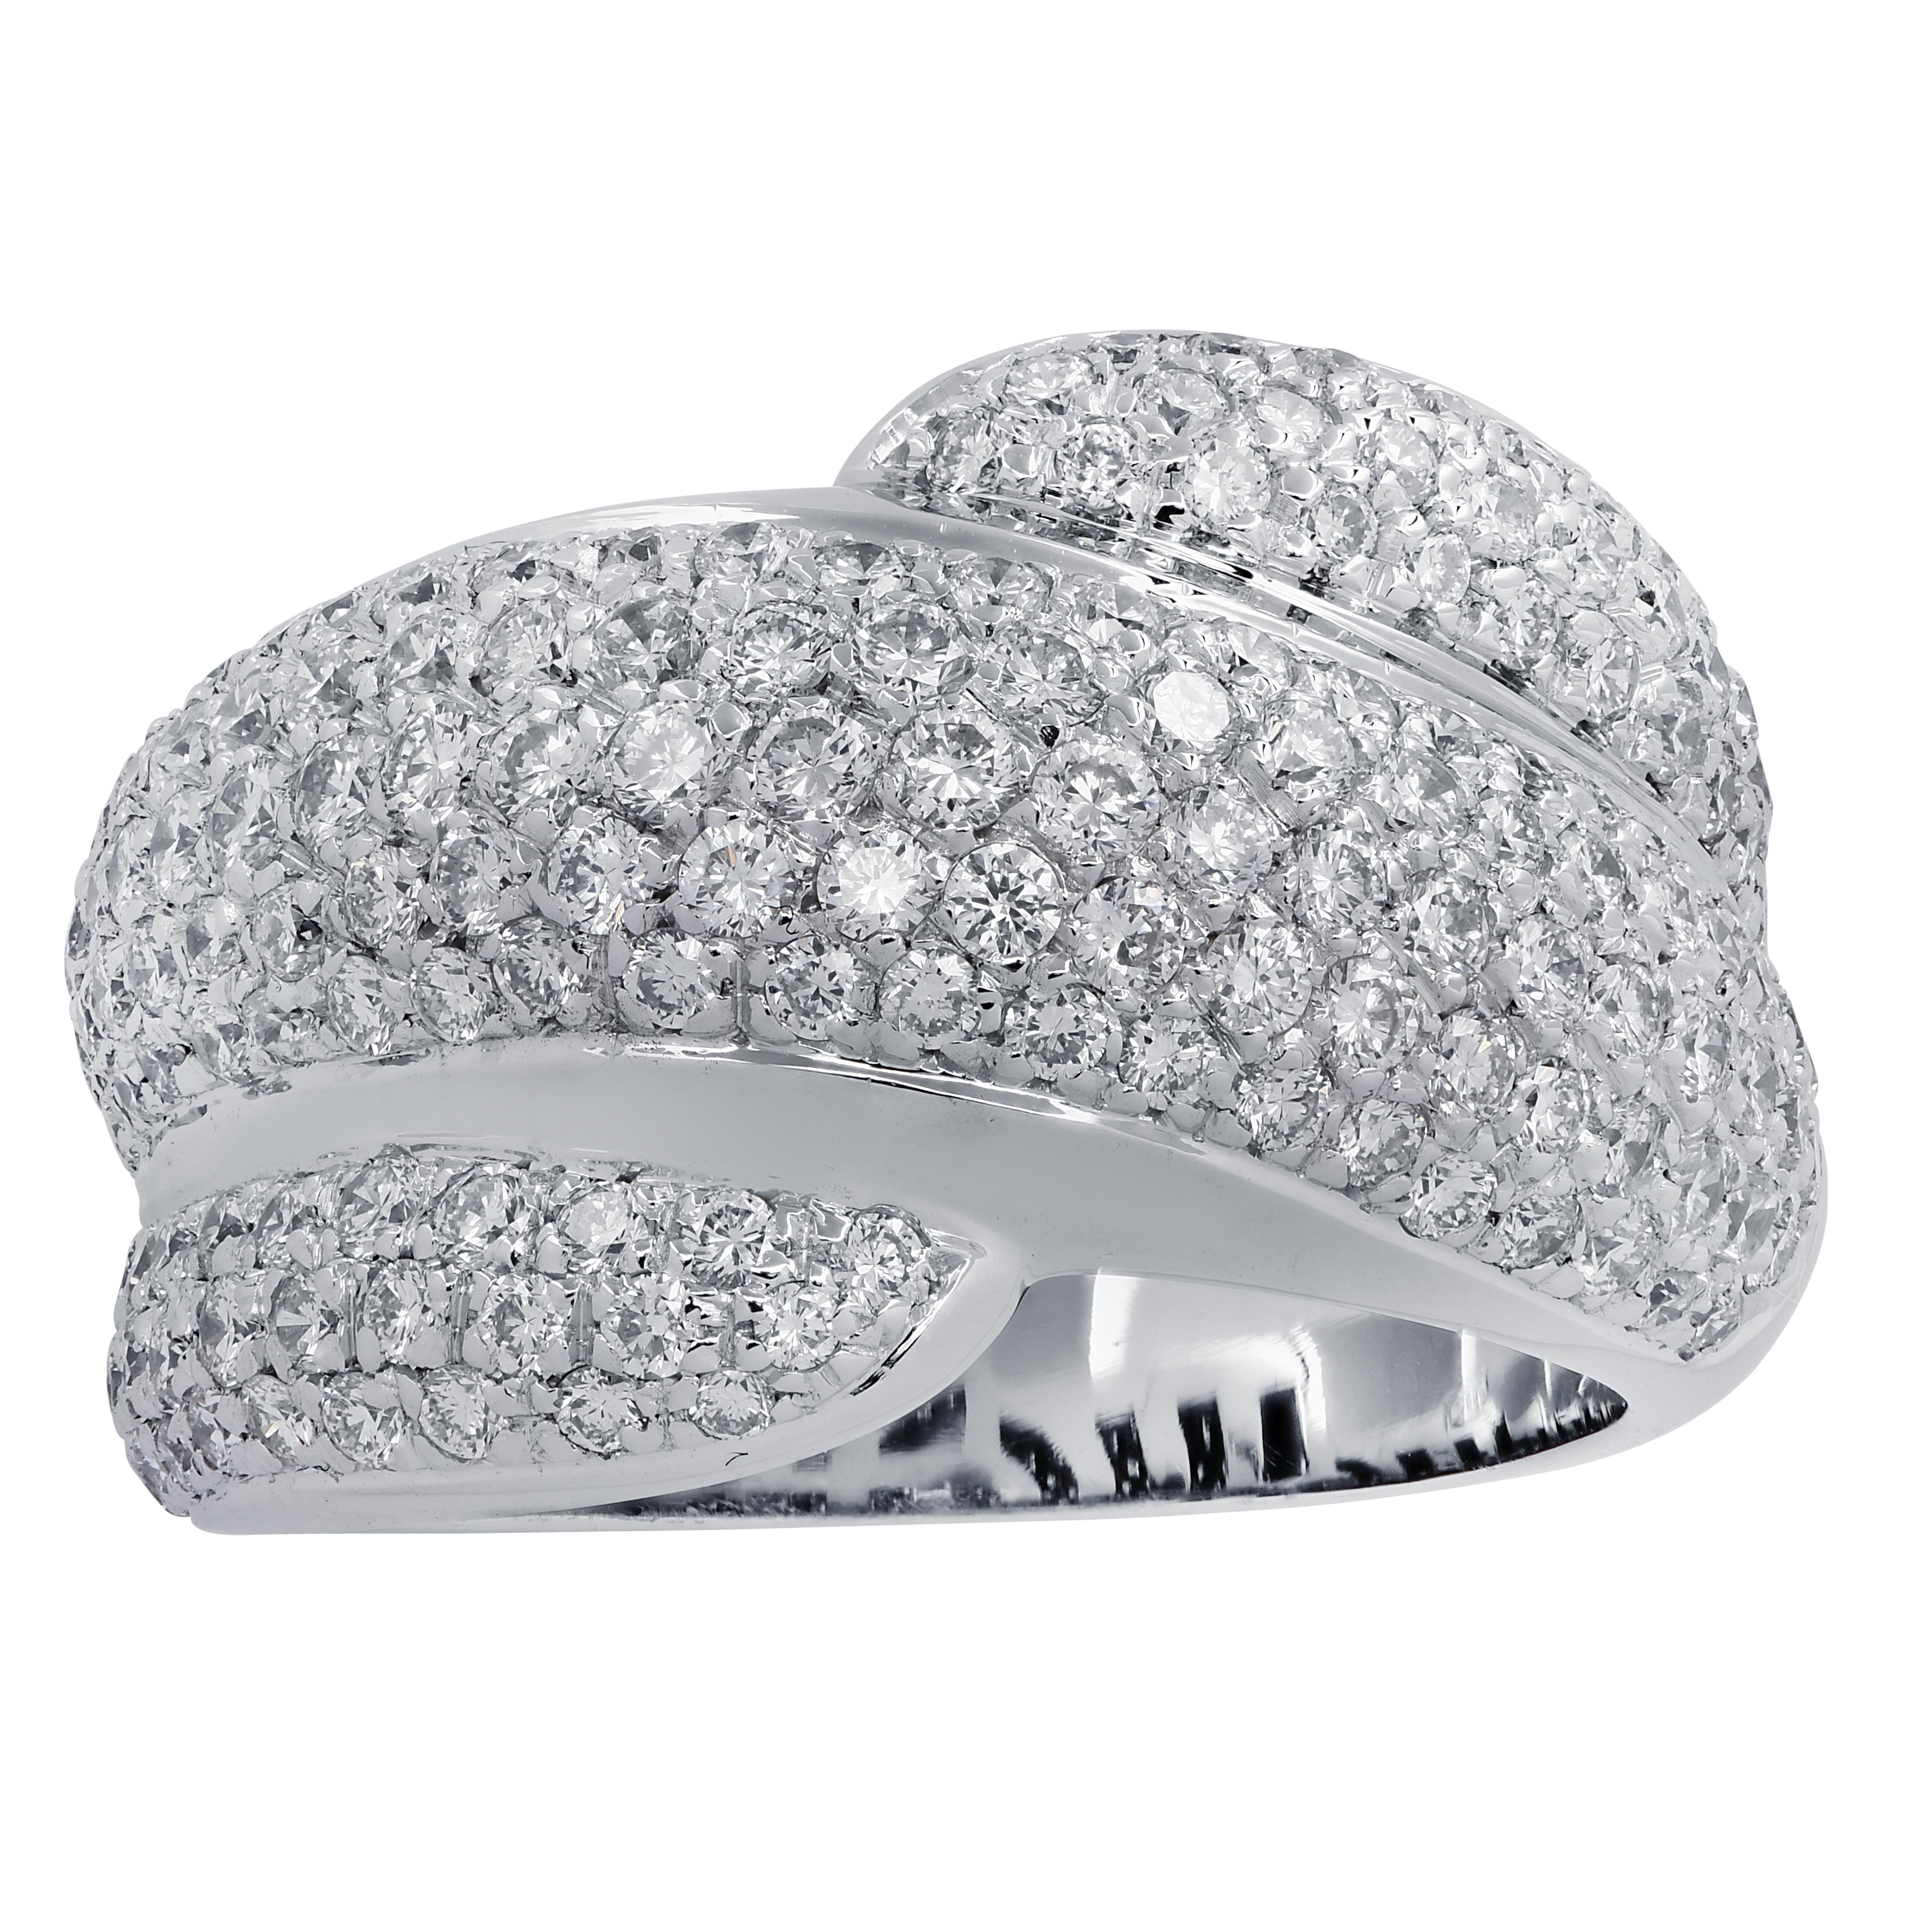 Striking band crafted in 18 karat white gold, featuring 3 rows, pave set with approximately 1.80 carats of round brilliant cut diamonds G color VS clarity. The diamond encrusted band wraps around the finger in a dazzling display of fire and light.